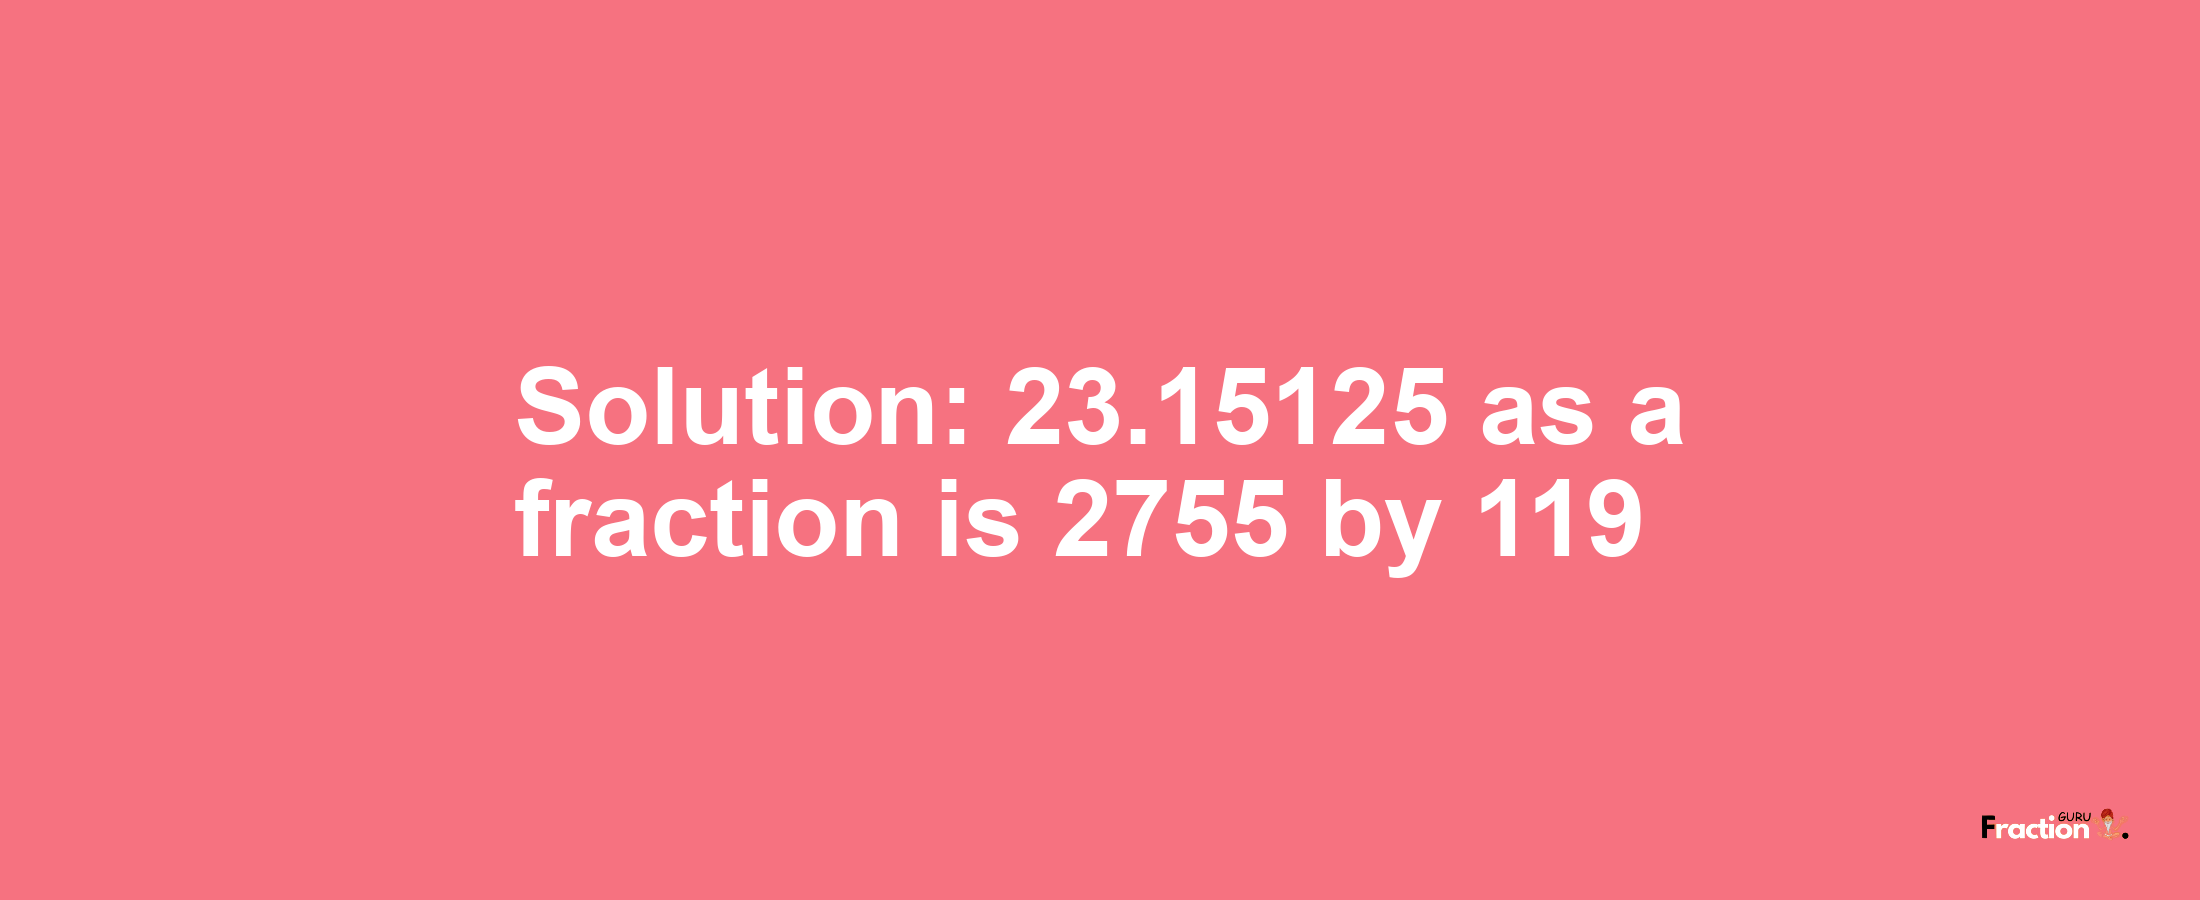 Solution:23.15125 as a fraction is 2755/119